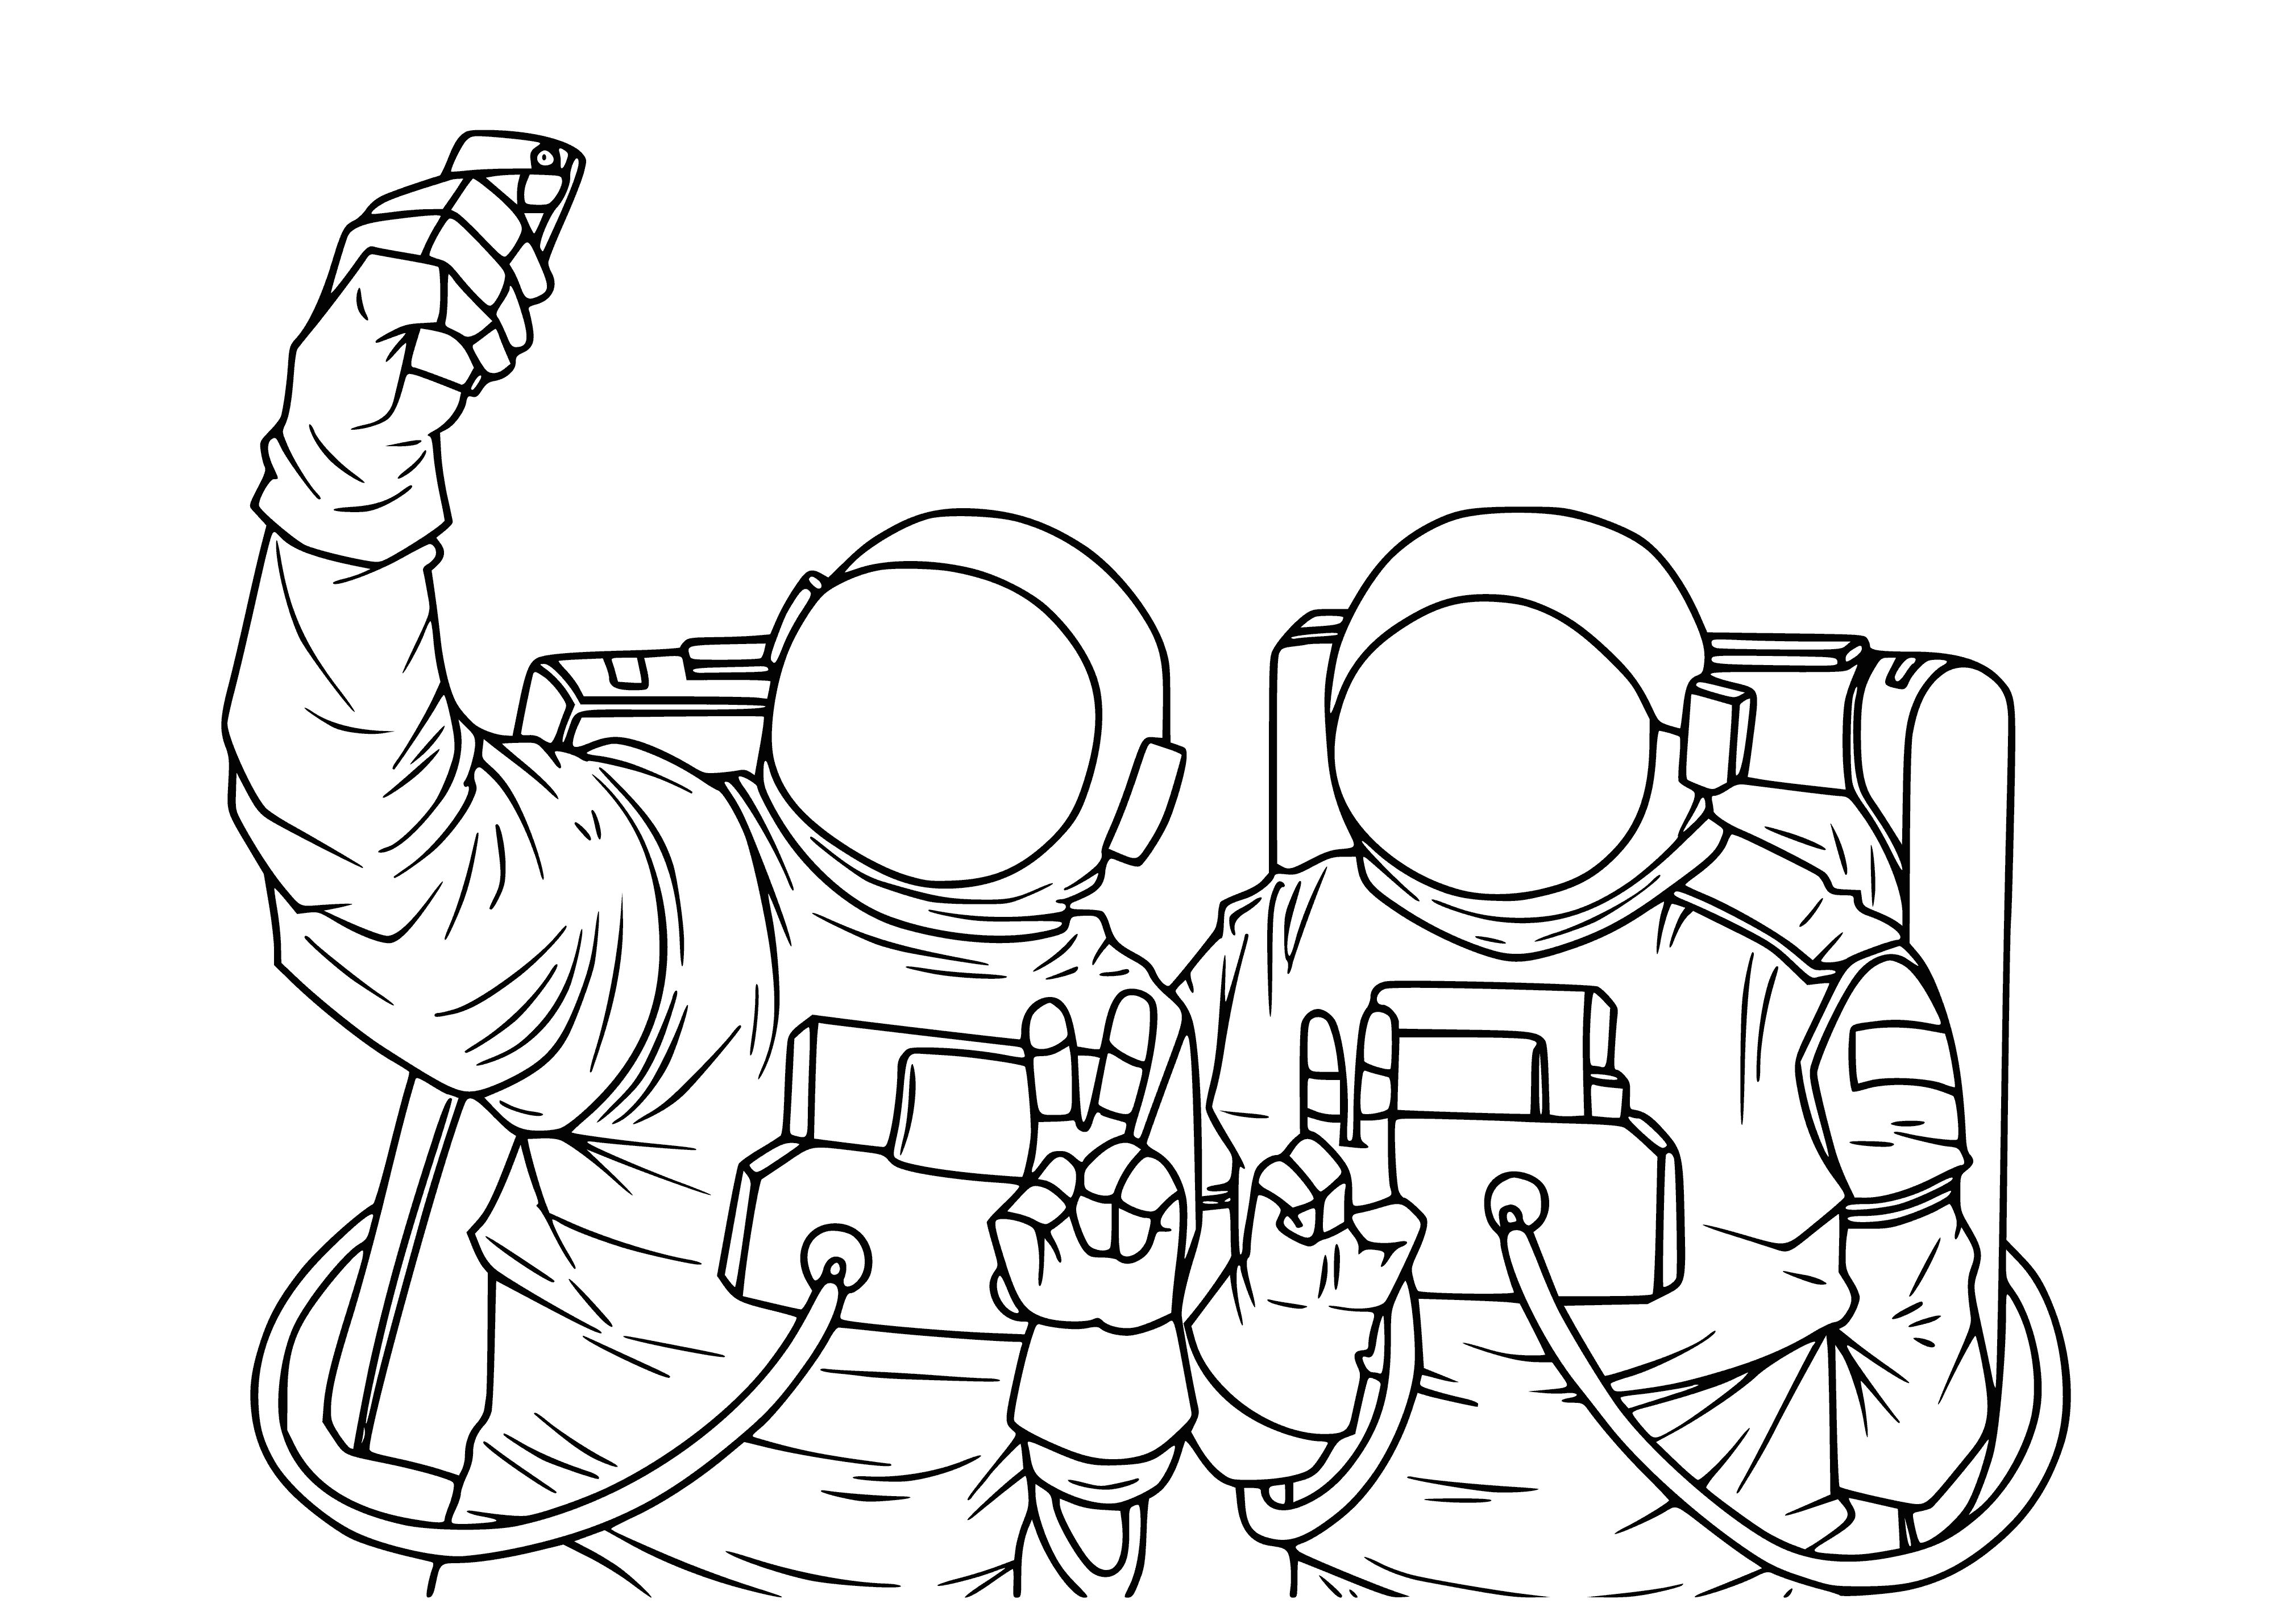 coloring page: Two figures meet at a rock; one's back turned, one faces it. Wearing black hats with white puffs, they stand on a thin, white line.